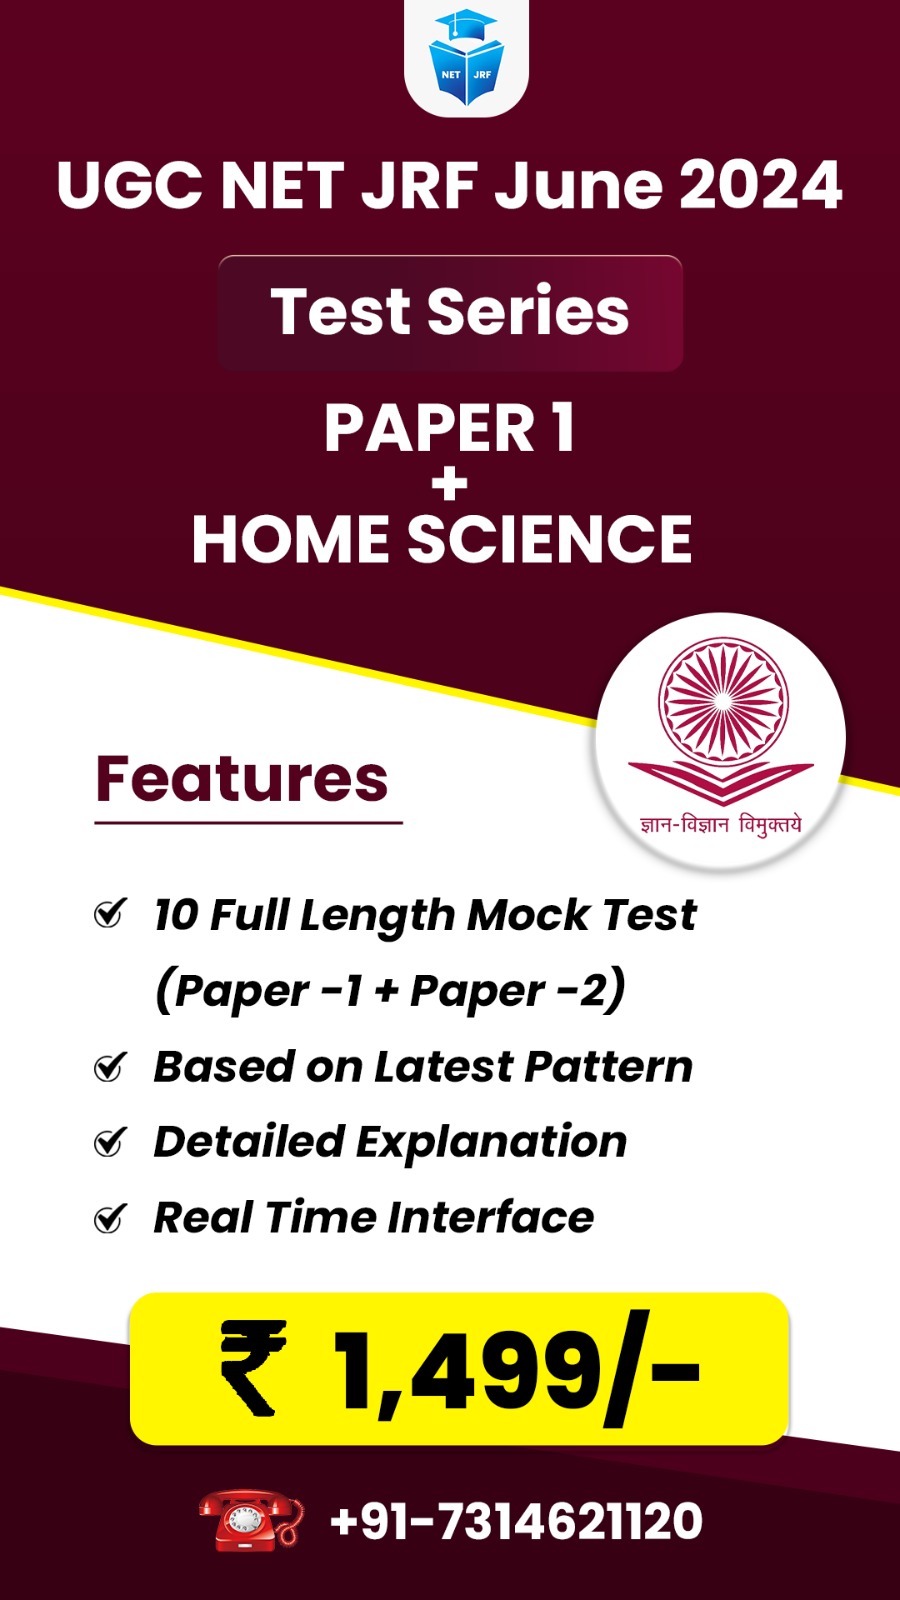 Home Science (Paper 1 + Paper 2) Test Series for June 2024